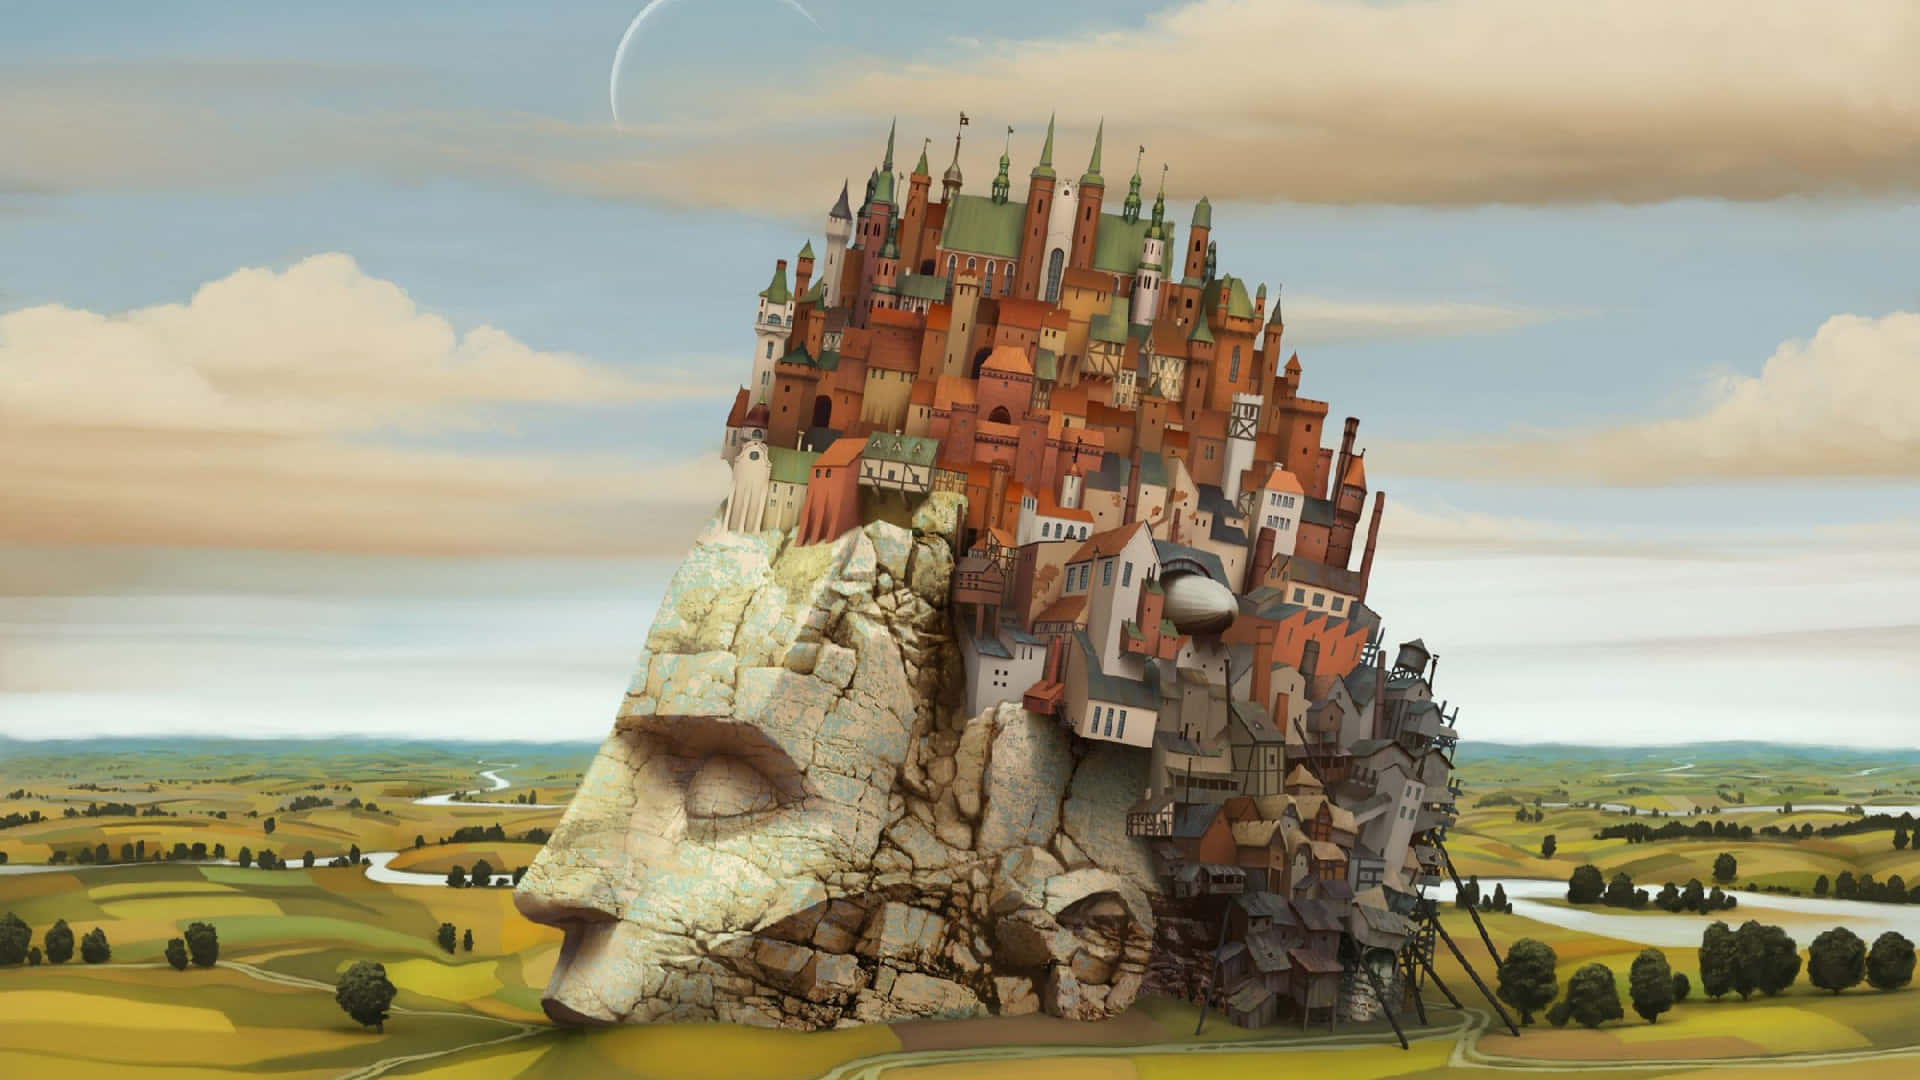 Surreal Art Castle On A Man's Head Picture